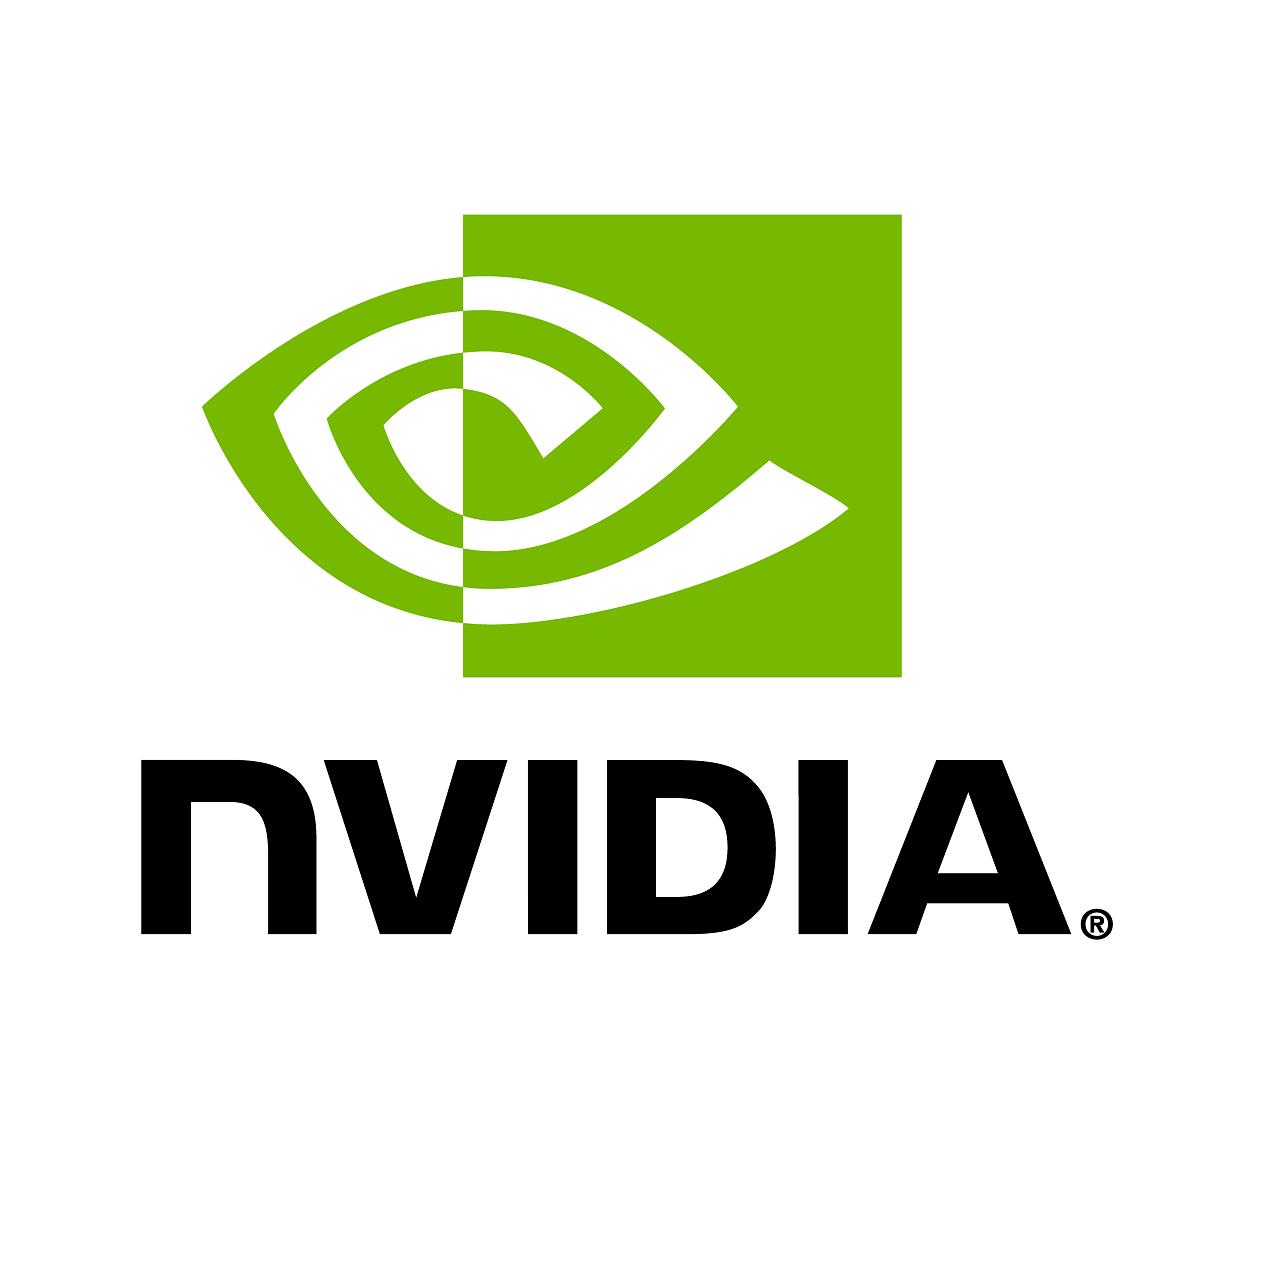 NVIDIA Support and Warranty, Silver, 1 Year, for SB7800 Series Switch